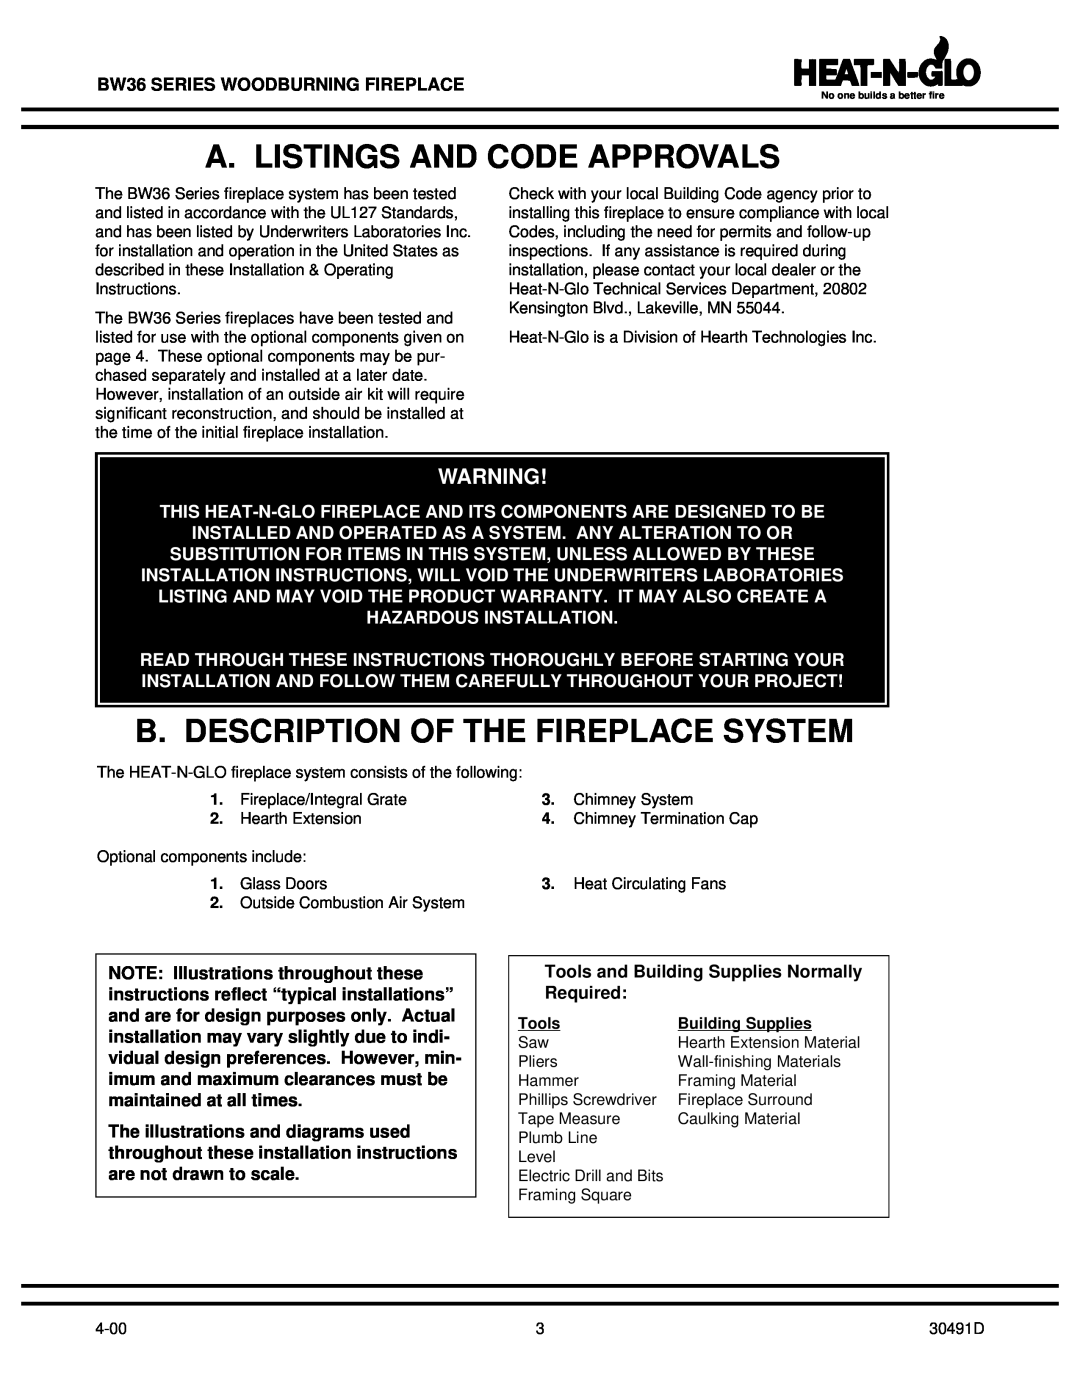 Heat & Glo LifeStyle BW36 operating instructions A. Listings And Code Approvals, B. Description Of The Fireplace System 